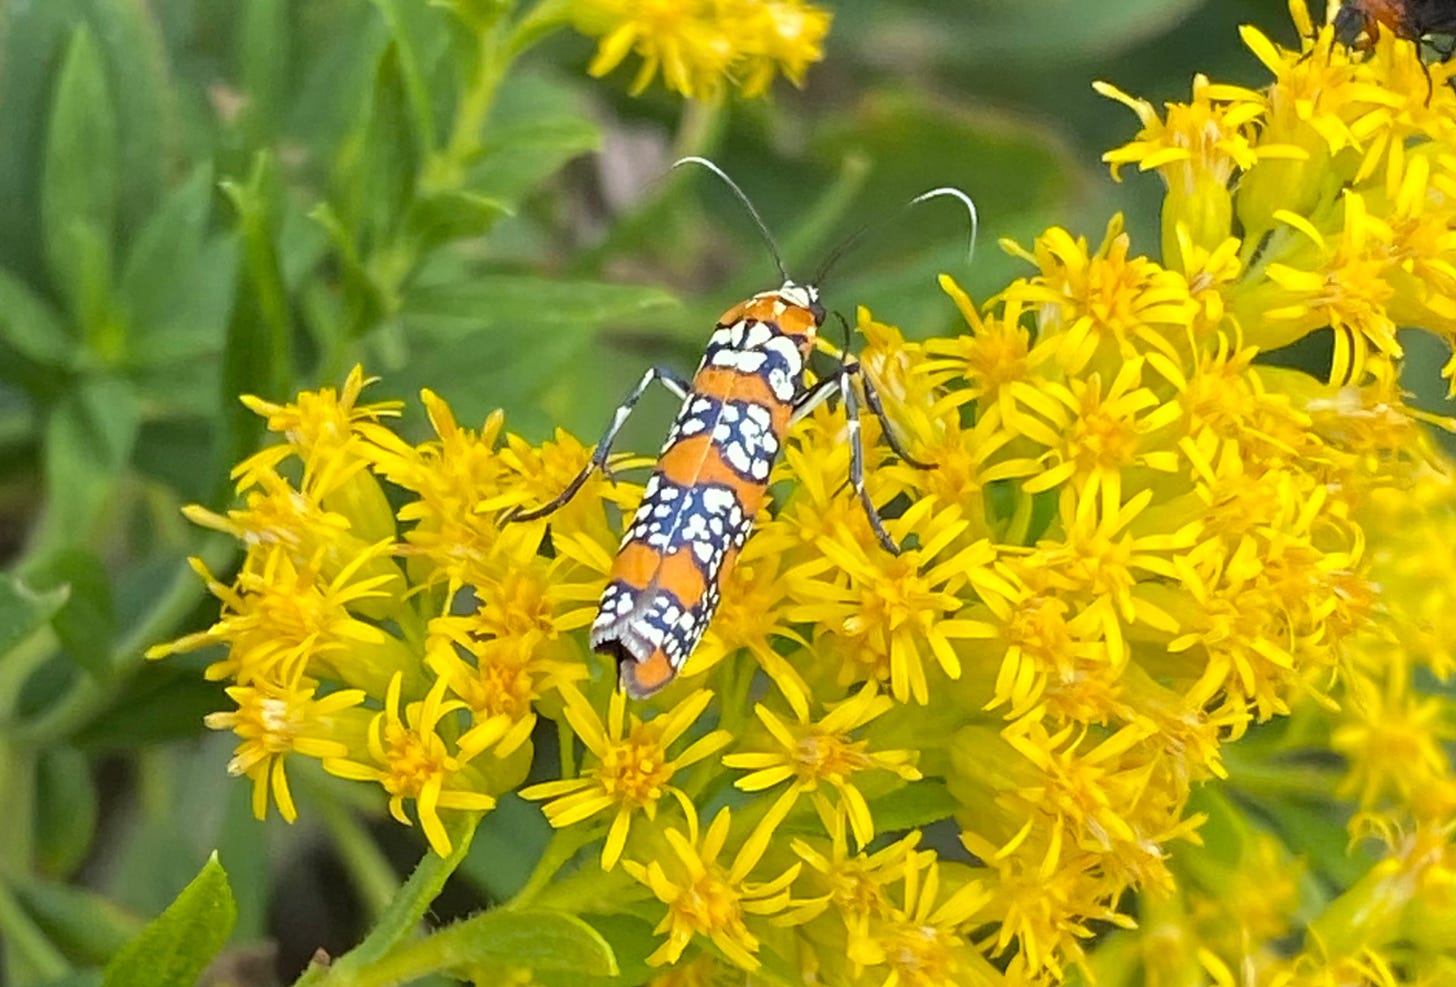 a long, bright orange  bug with four rows of white spots with thick black borders across its body, facing away and centered on a plant with lots of small yellow flowers. it has long antennae.